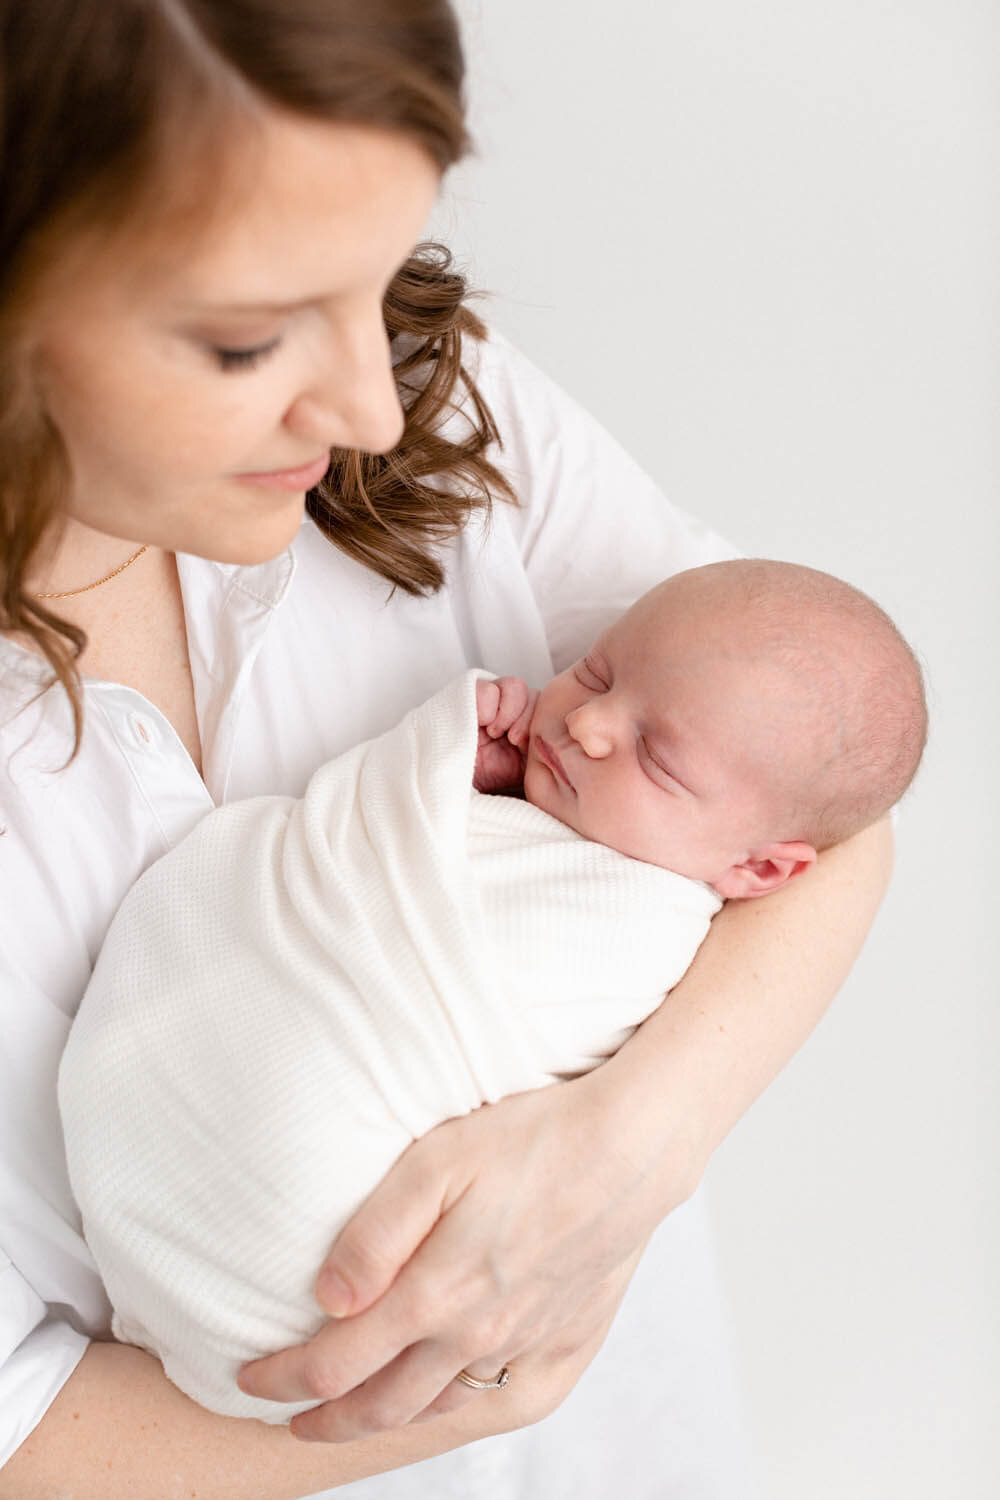 Mama in a white buttoned down collared shirt is holding her baby in her arms and looking down at her with a soft smile on her face. Baby is swaddled in white and sleeping with one hand up by her little face.